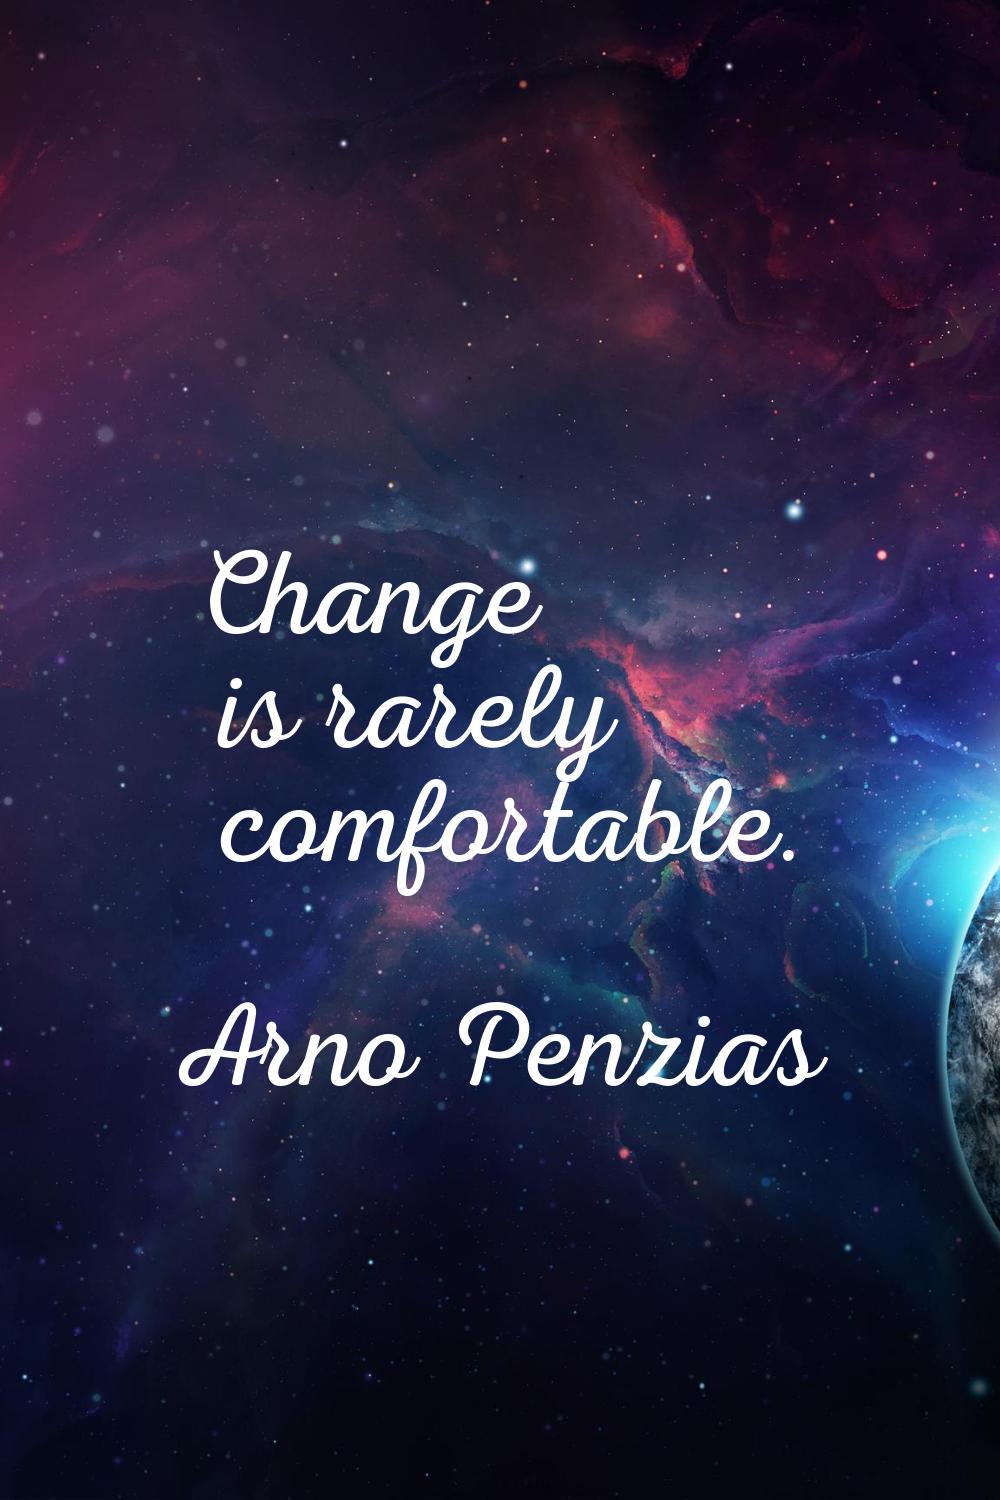 Change is rarely comfortable.